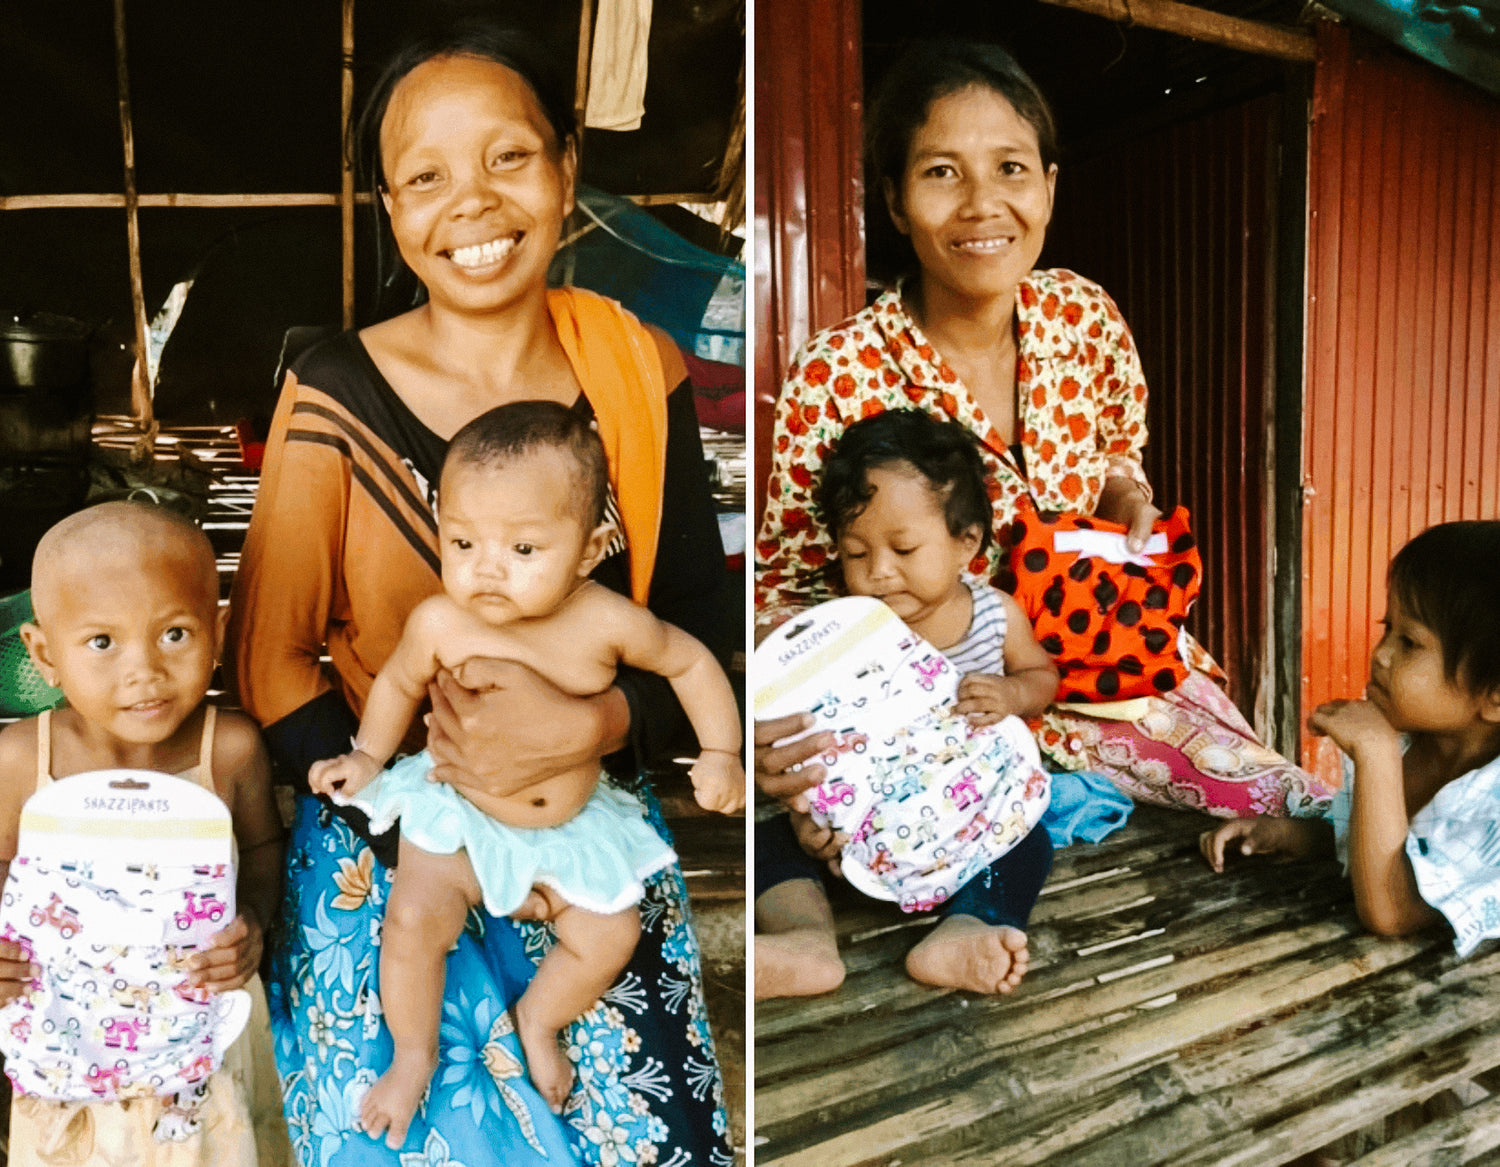 two images of women holding their 2 young children and smiling as they receive donated Snazzi diapers.